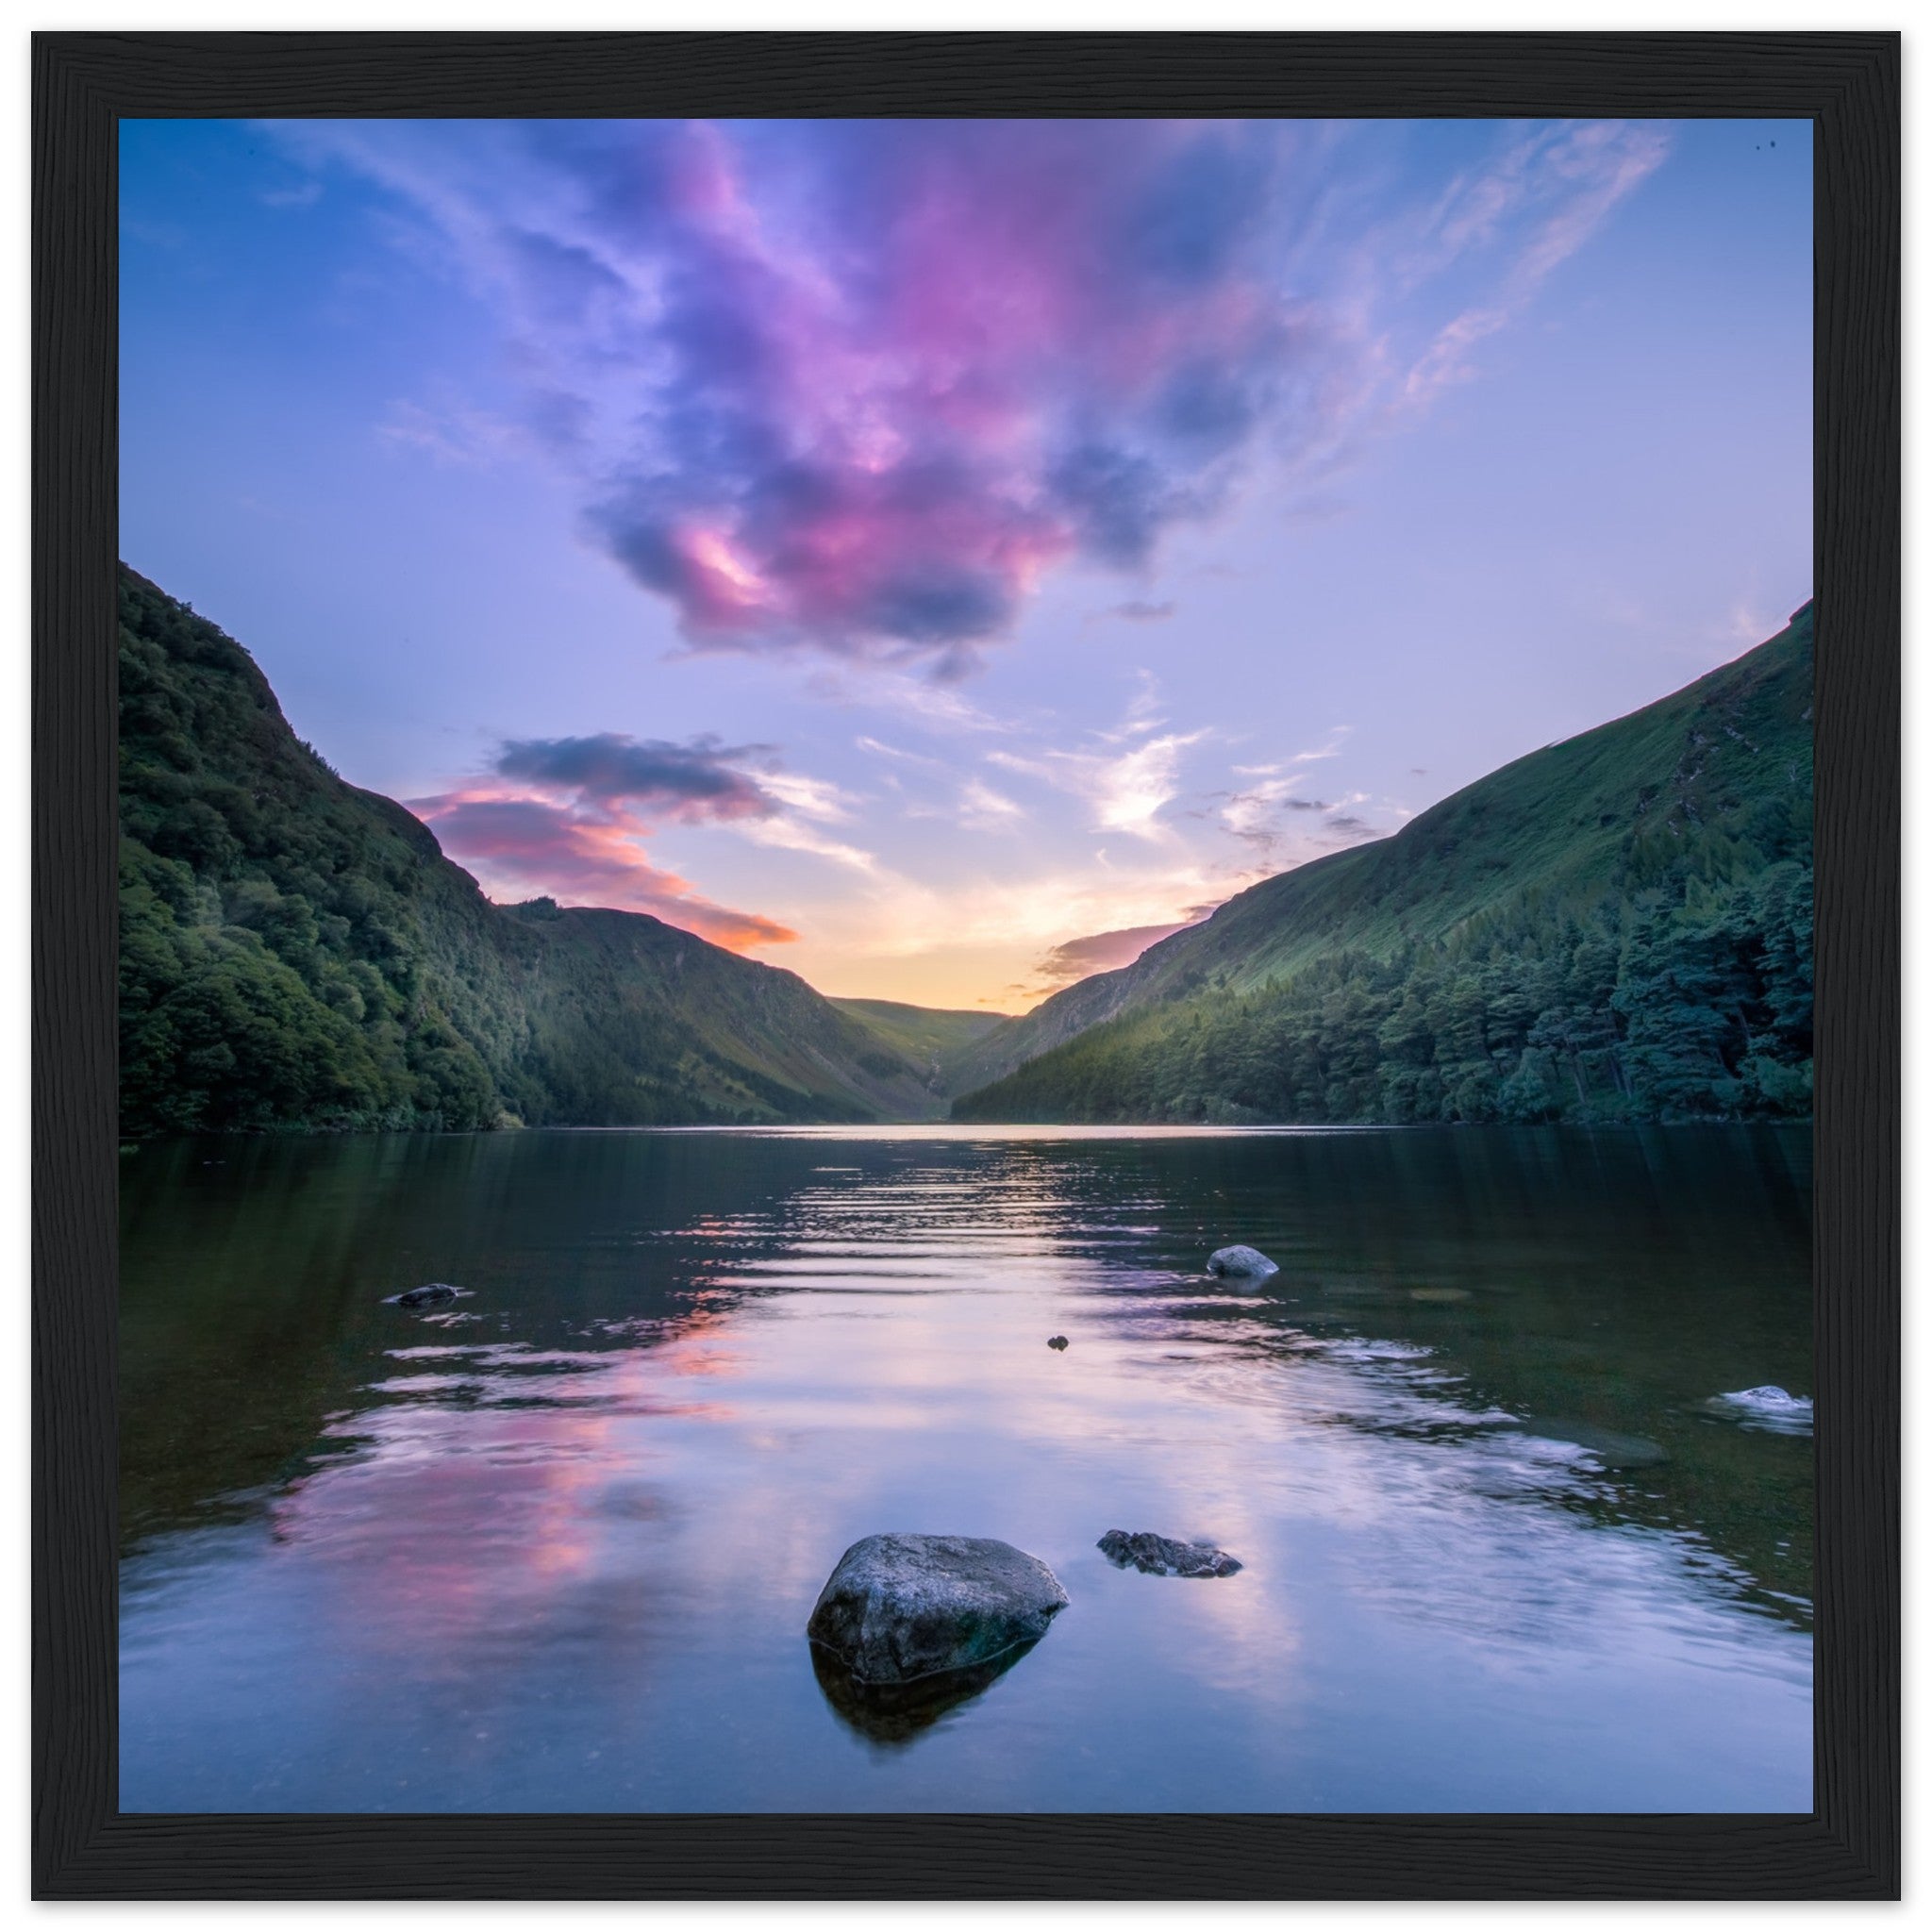 Framed wall art print of Glendalough's Upper Lake at dusk in Co. Wicklow. Features a serene reflection of the sky in calm waters, surrounded by lush green landscape. Perfect for nature lovers and adding a touch of Irish tranquility to any space.